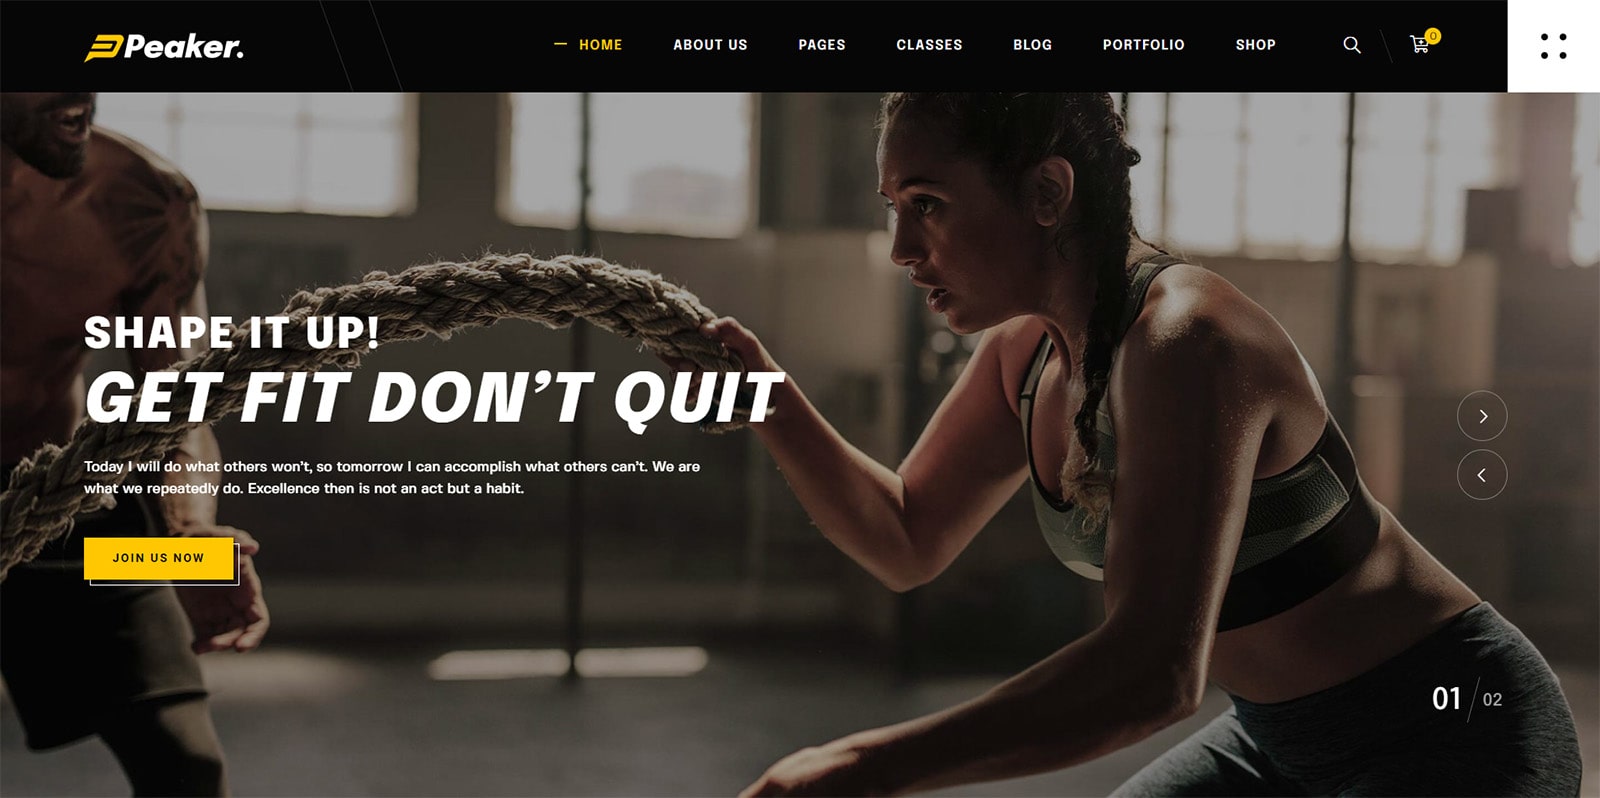 Image of Peaker, a responsive fitness theme for WordPress websites with multiple layouts.